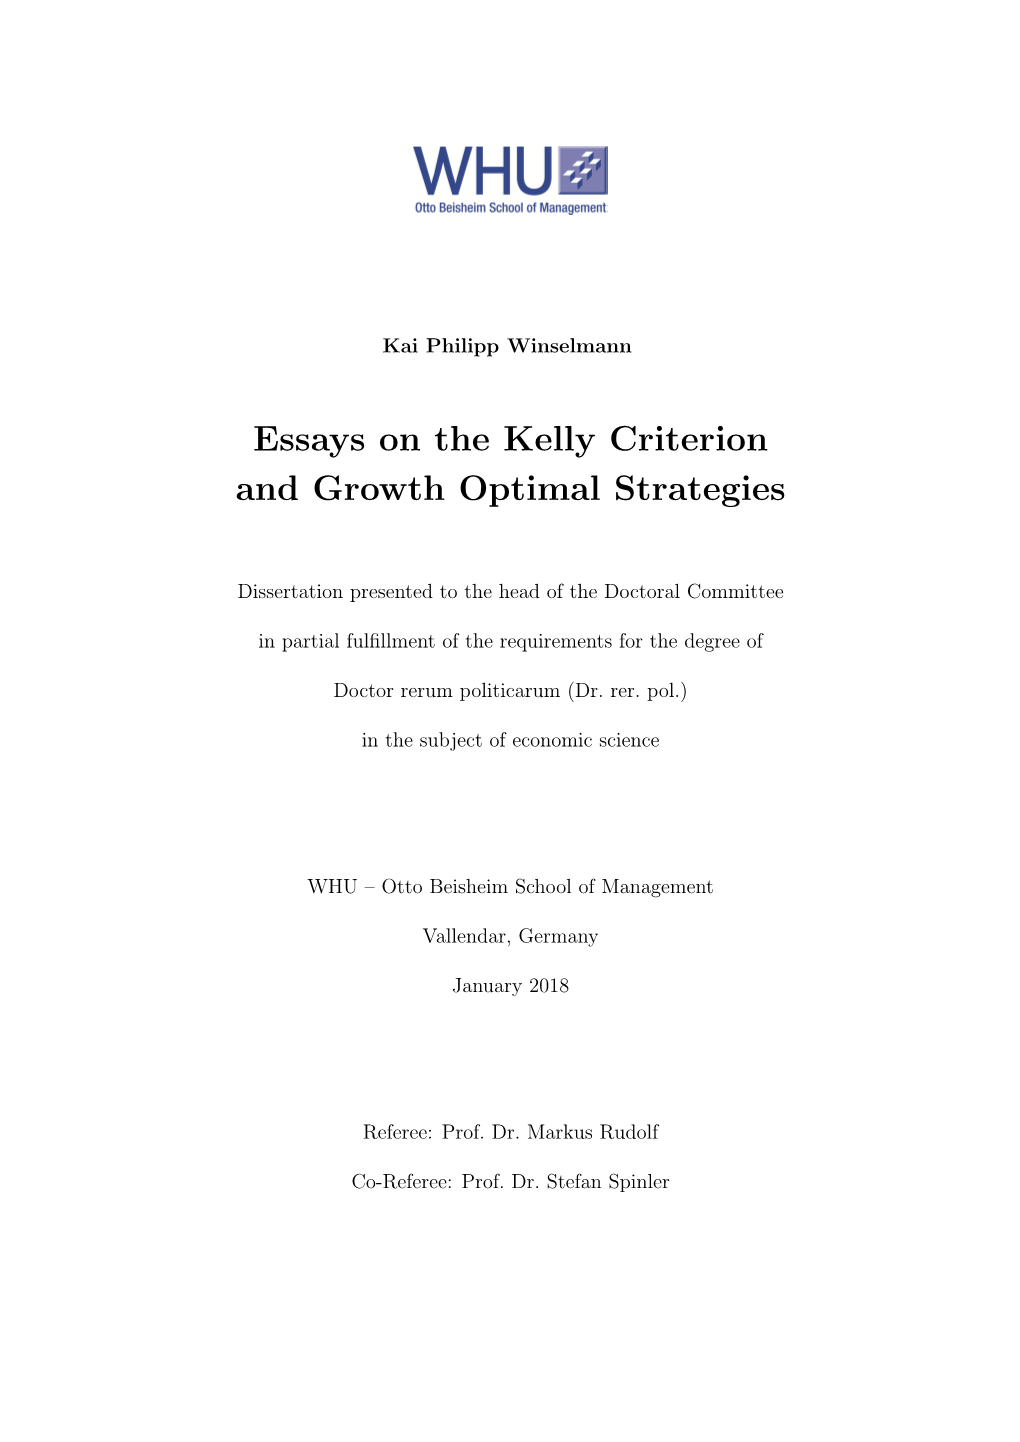 Essays on the Kelly Criterion and Growth Optimal Strategies